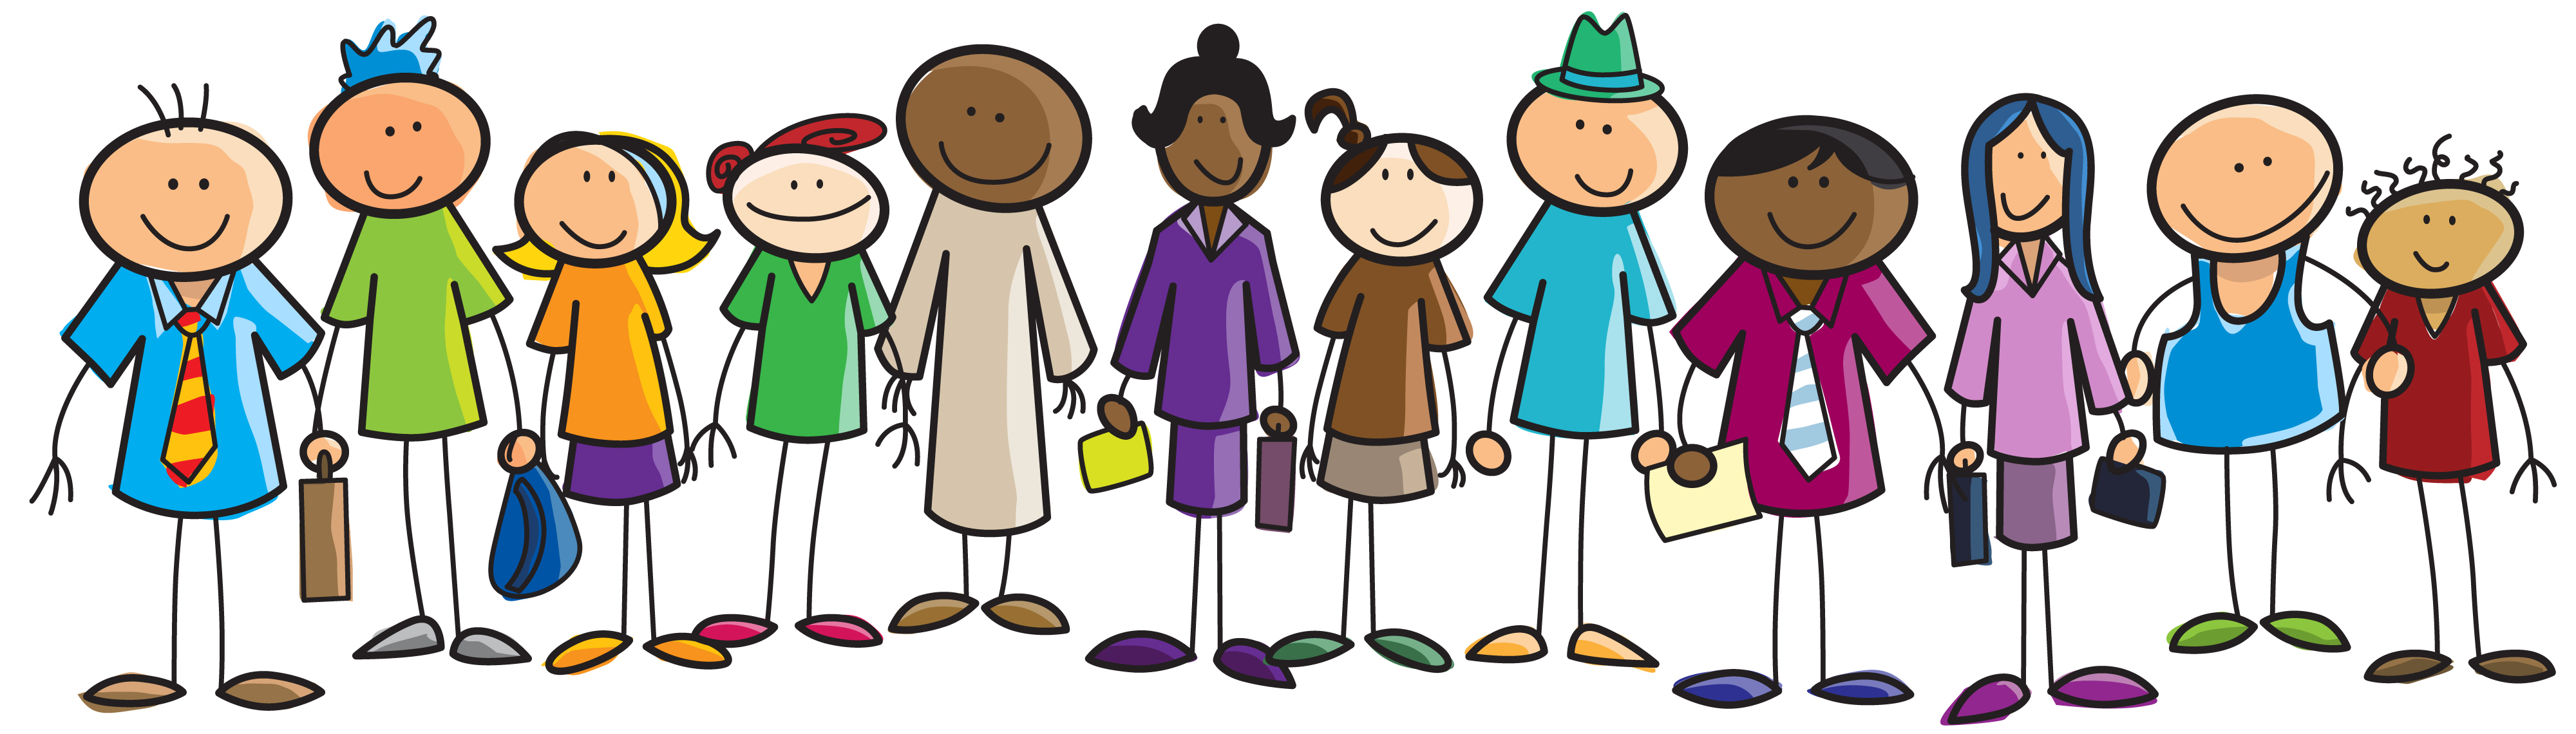 Cartoon People In Line - Clipart library